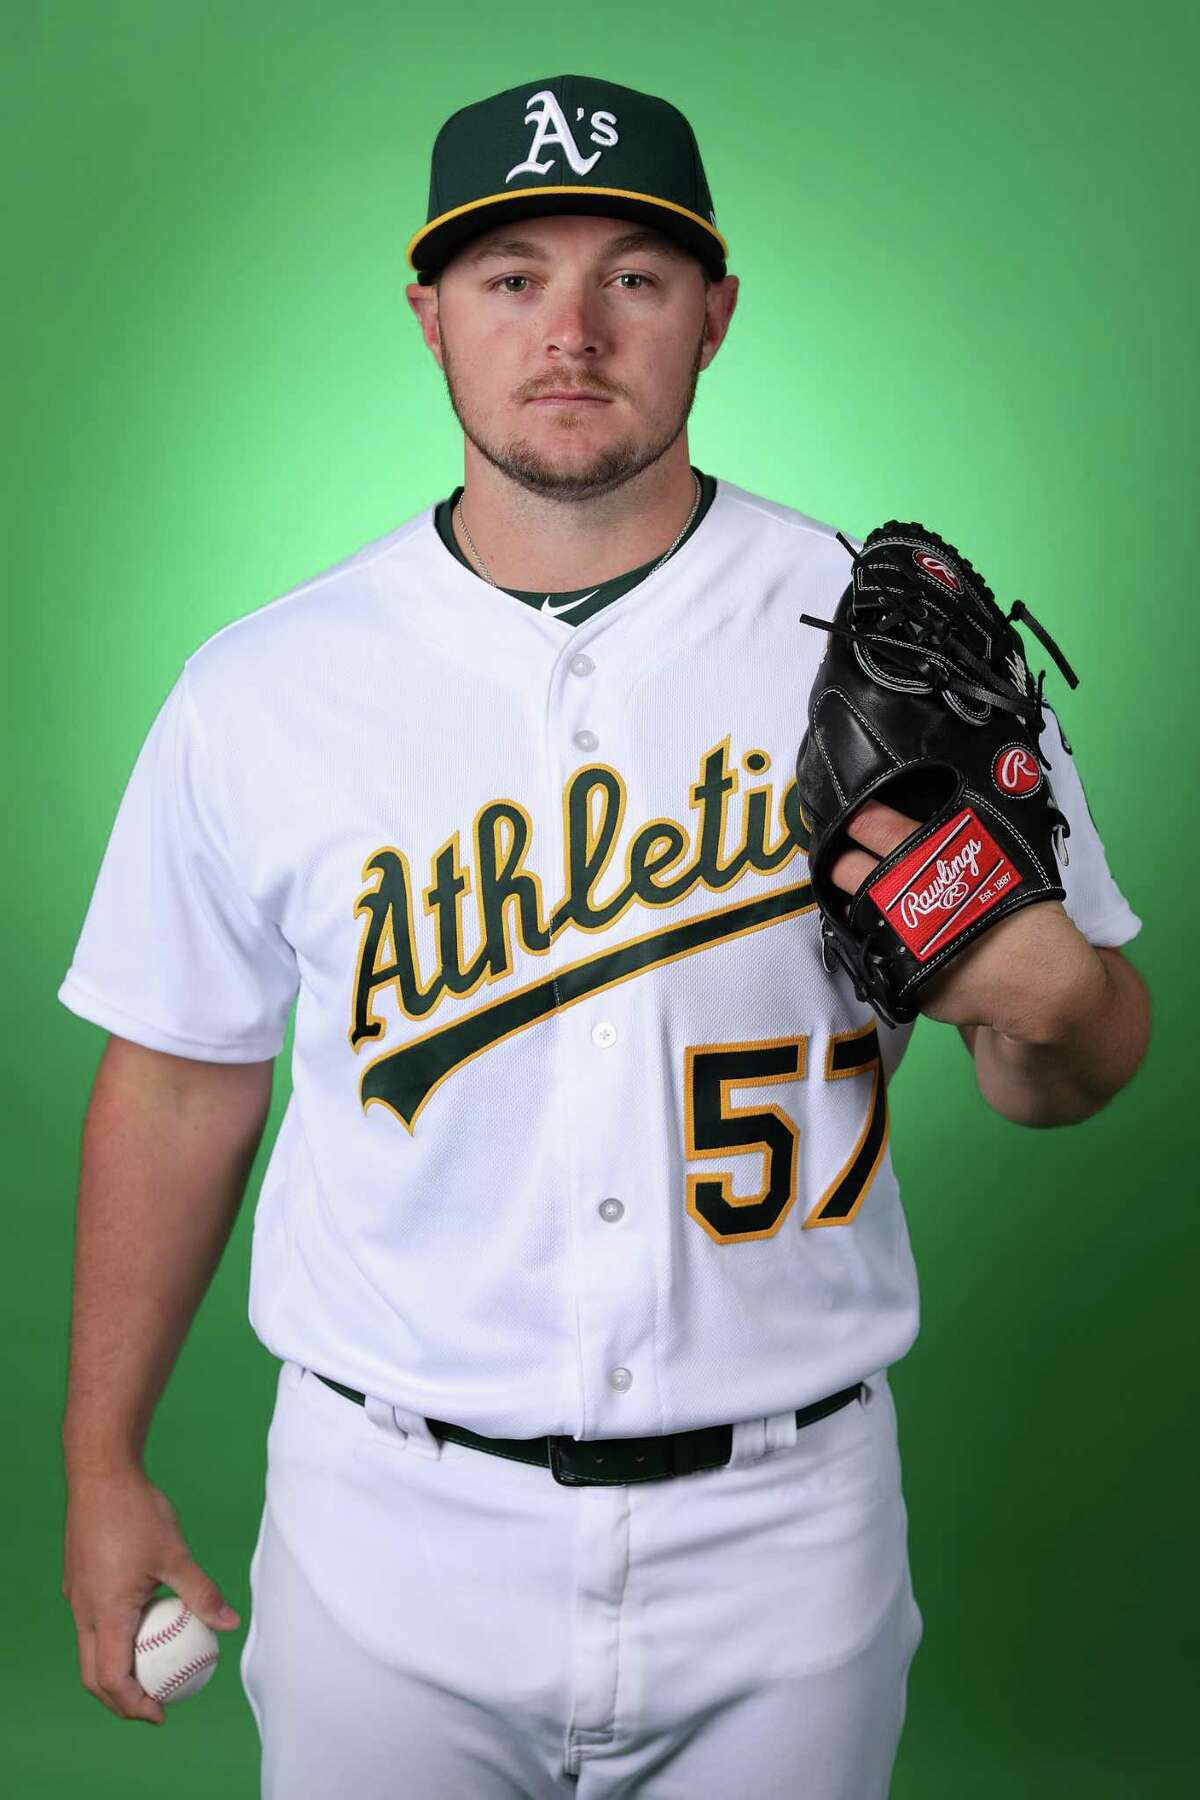 Pitcher J.B. Wendelken #57 of the Oakland Athletics poses for a portrait during photo day at HoHoKam Stadium on February 19, 2019 in Mesa, Arizona.